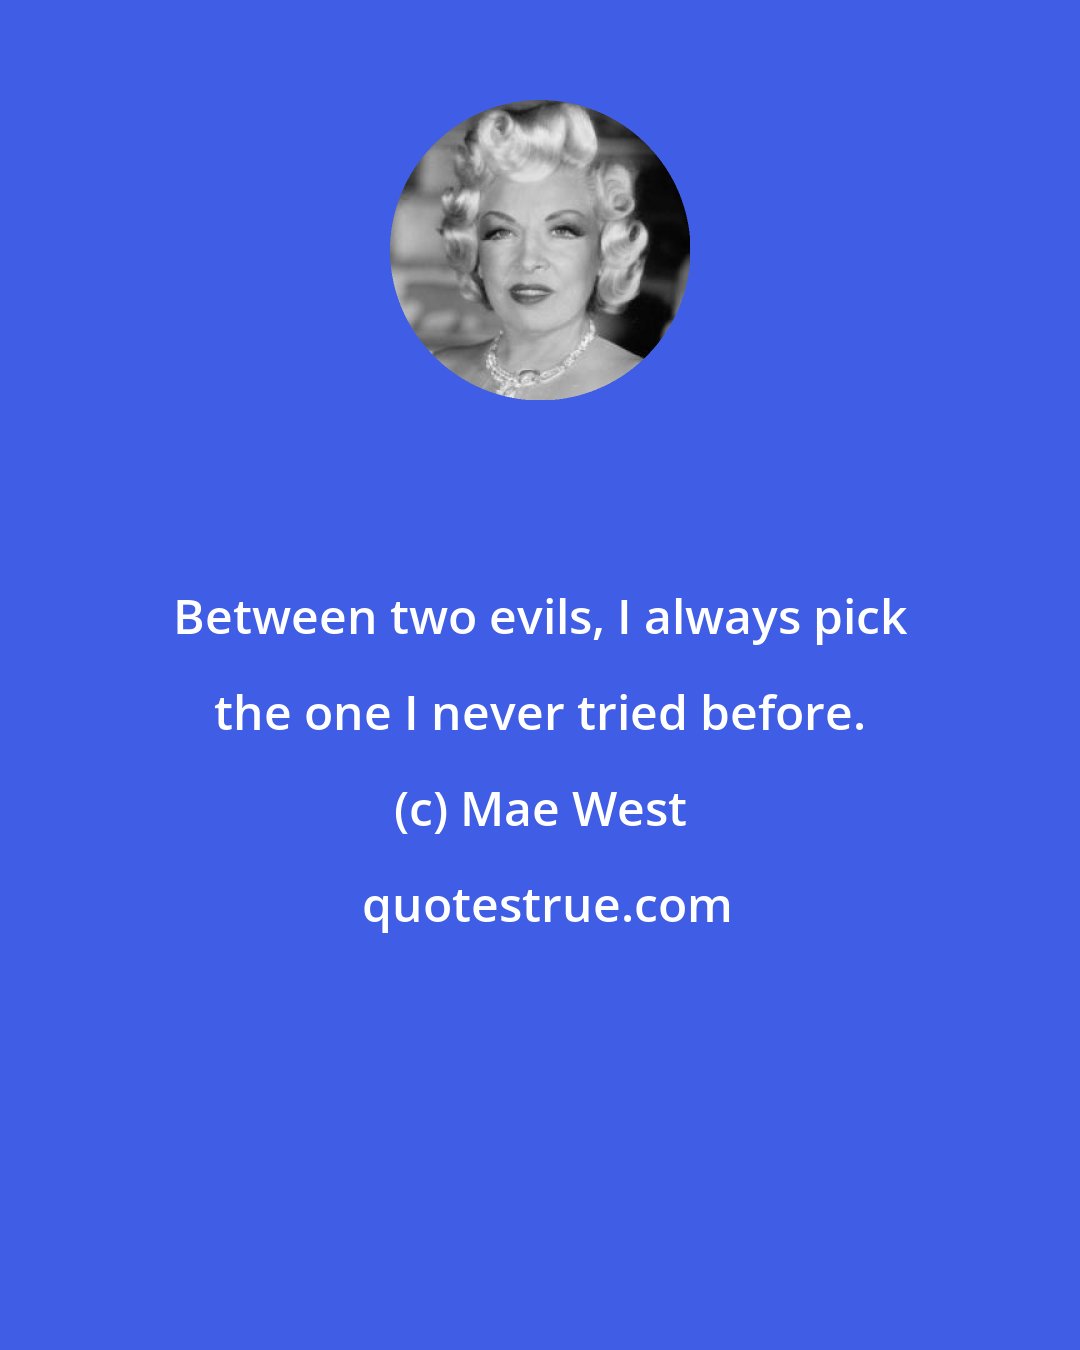 Mae West: Between two evils, I always pick the one I never tried before.